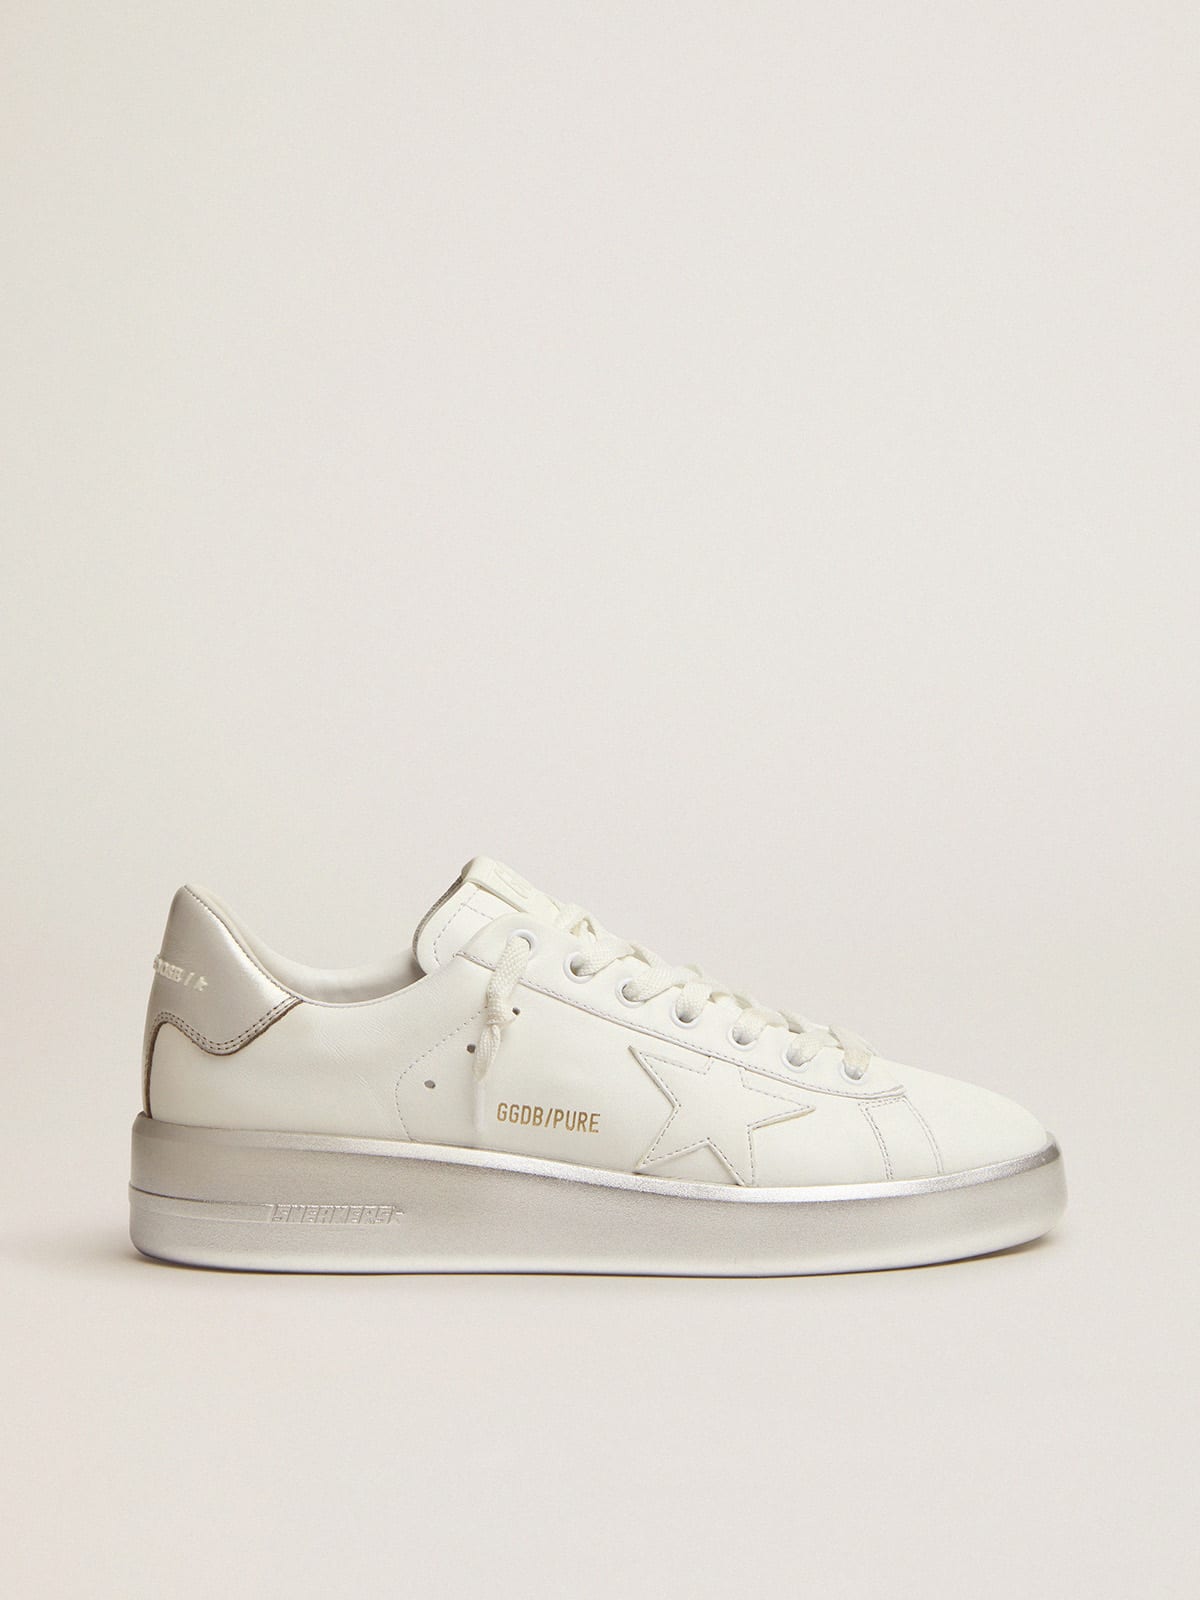 Purestar sneakers in leather with silver laminated heel tab and foxing